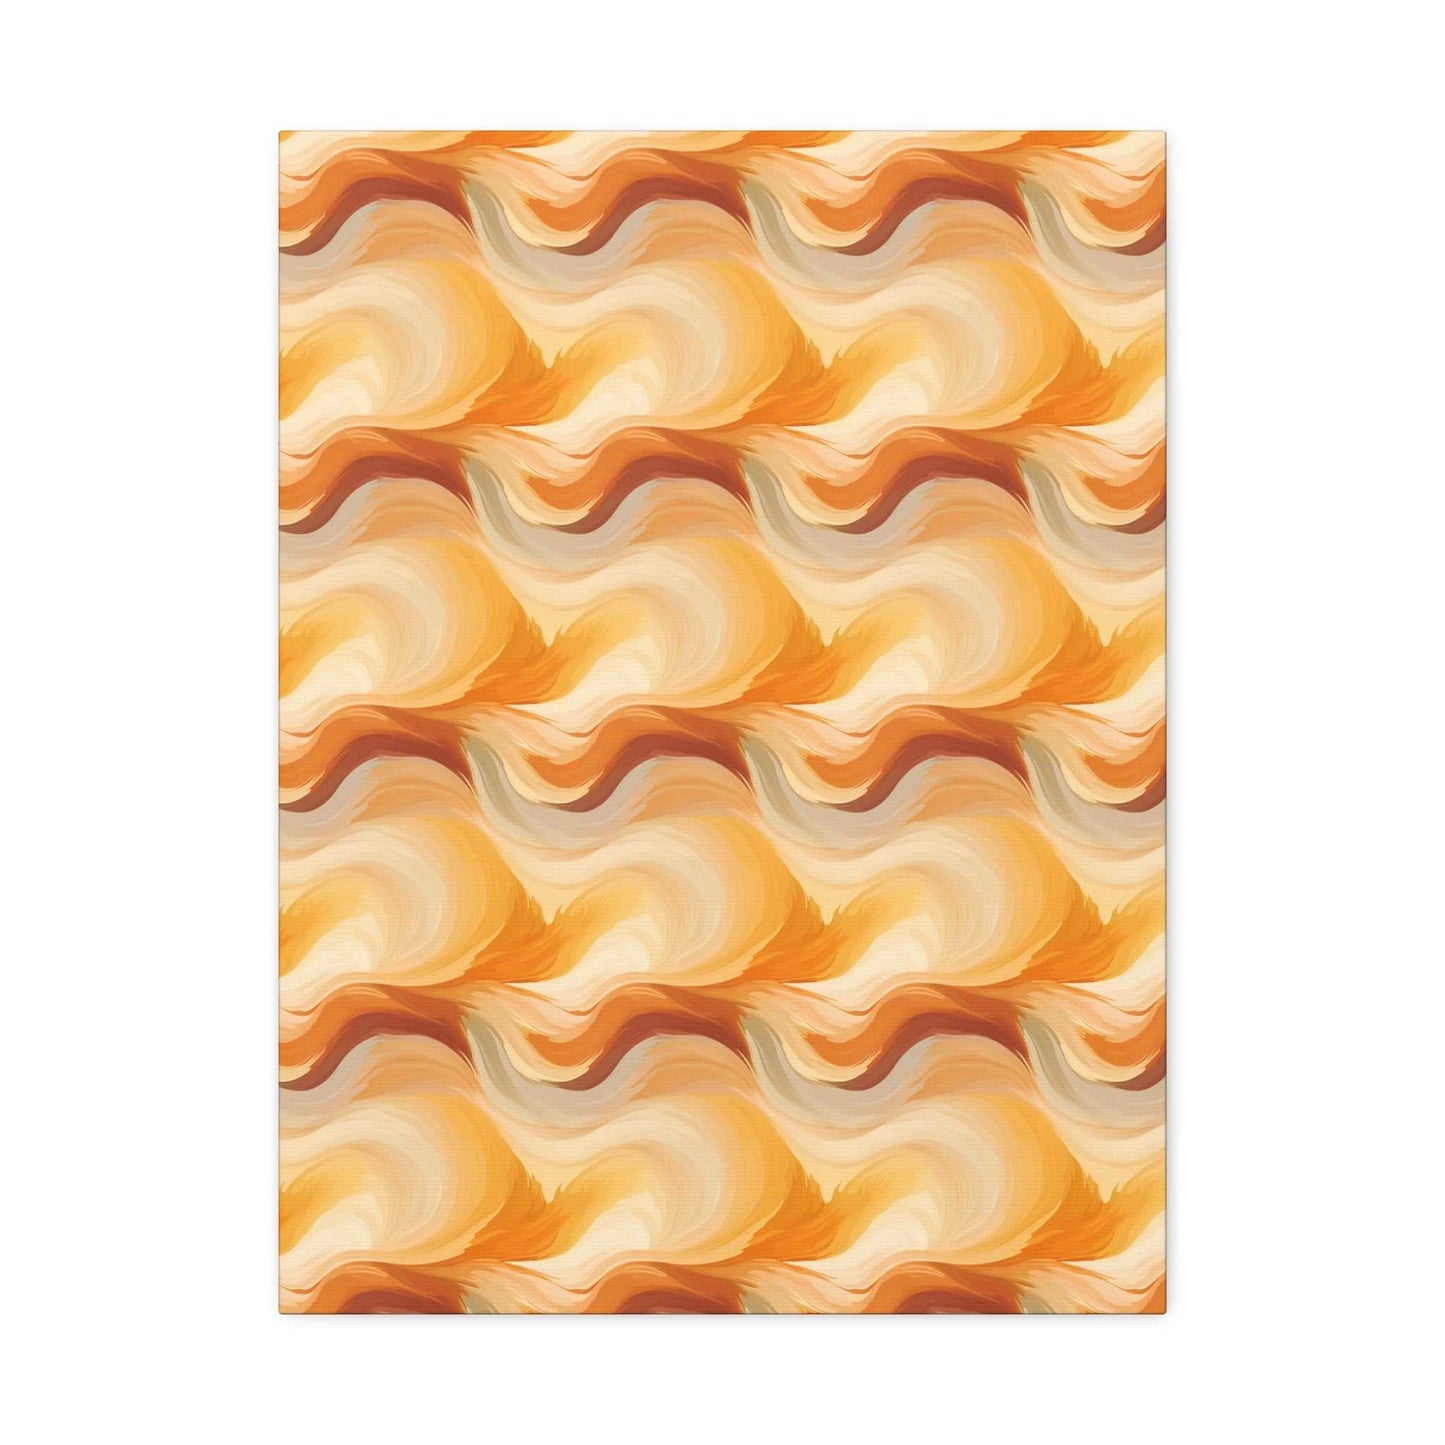 Amber Waves: The Breath of Autumn - Satin Canvas, Stretched - Pattern Symphony